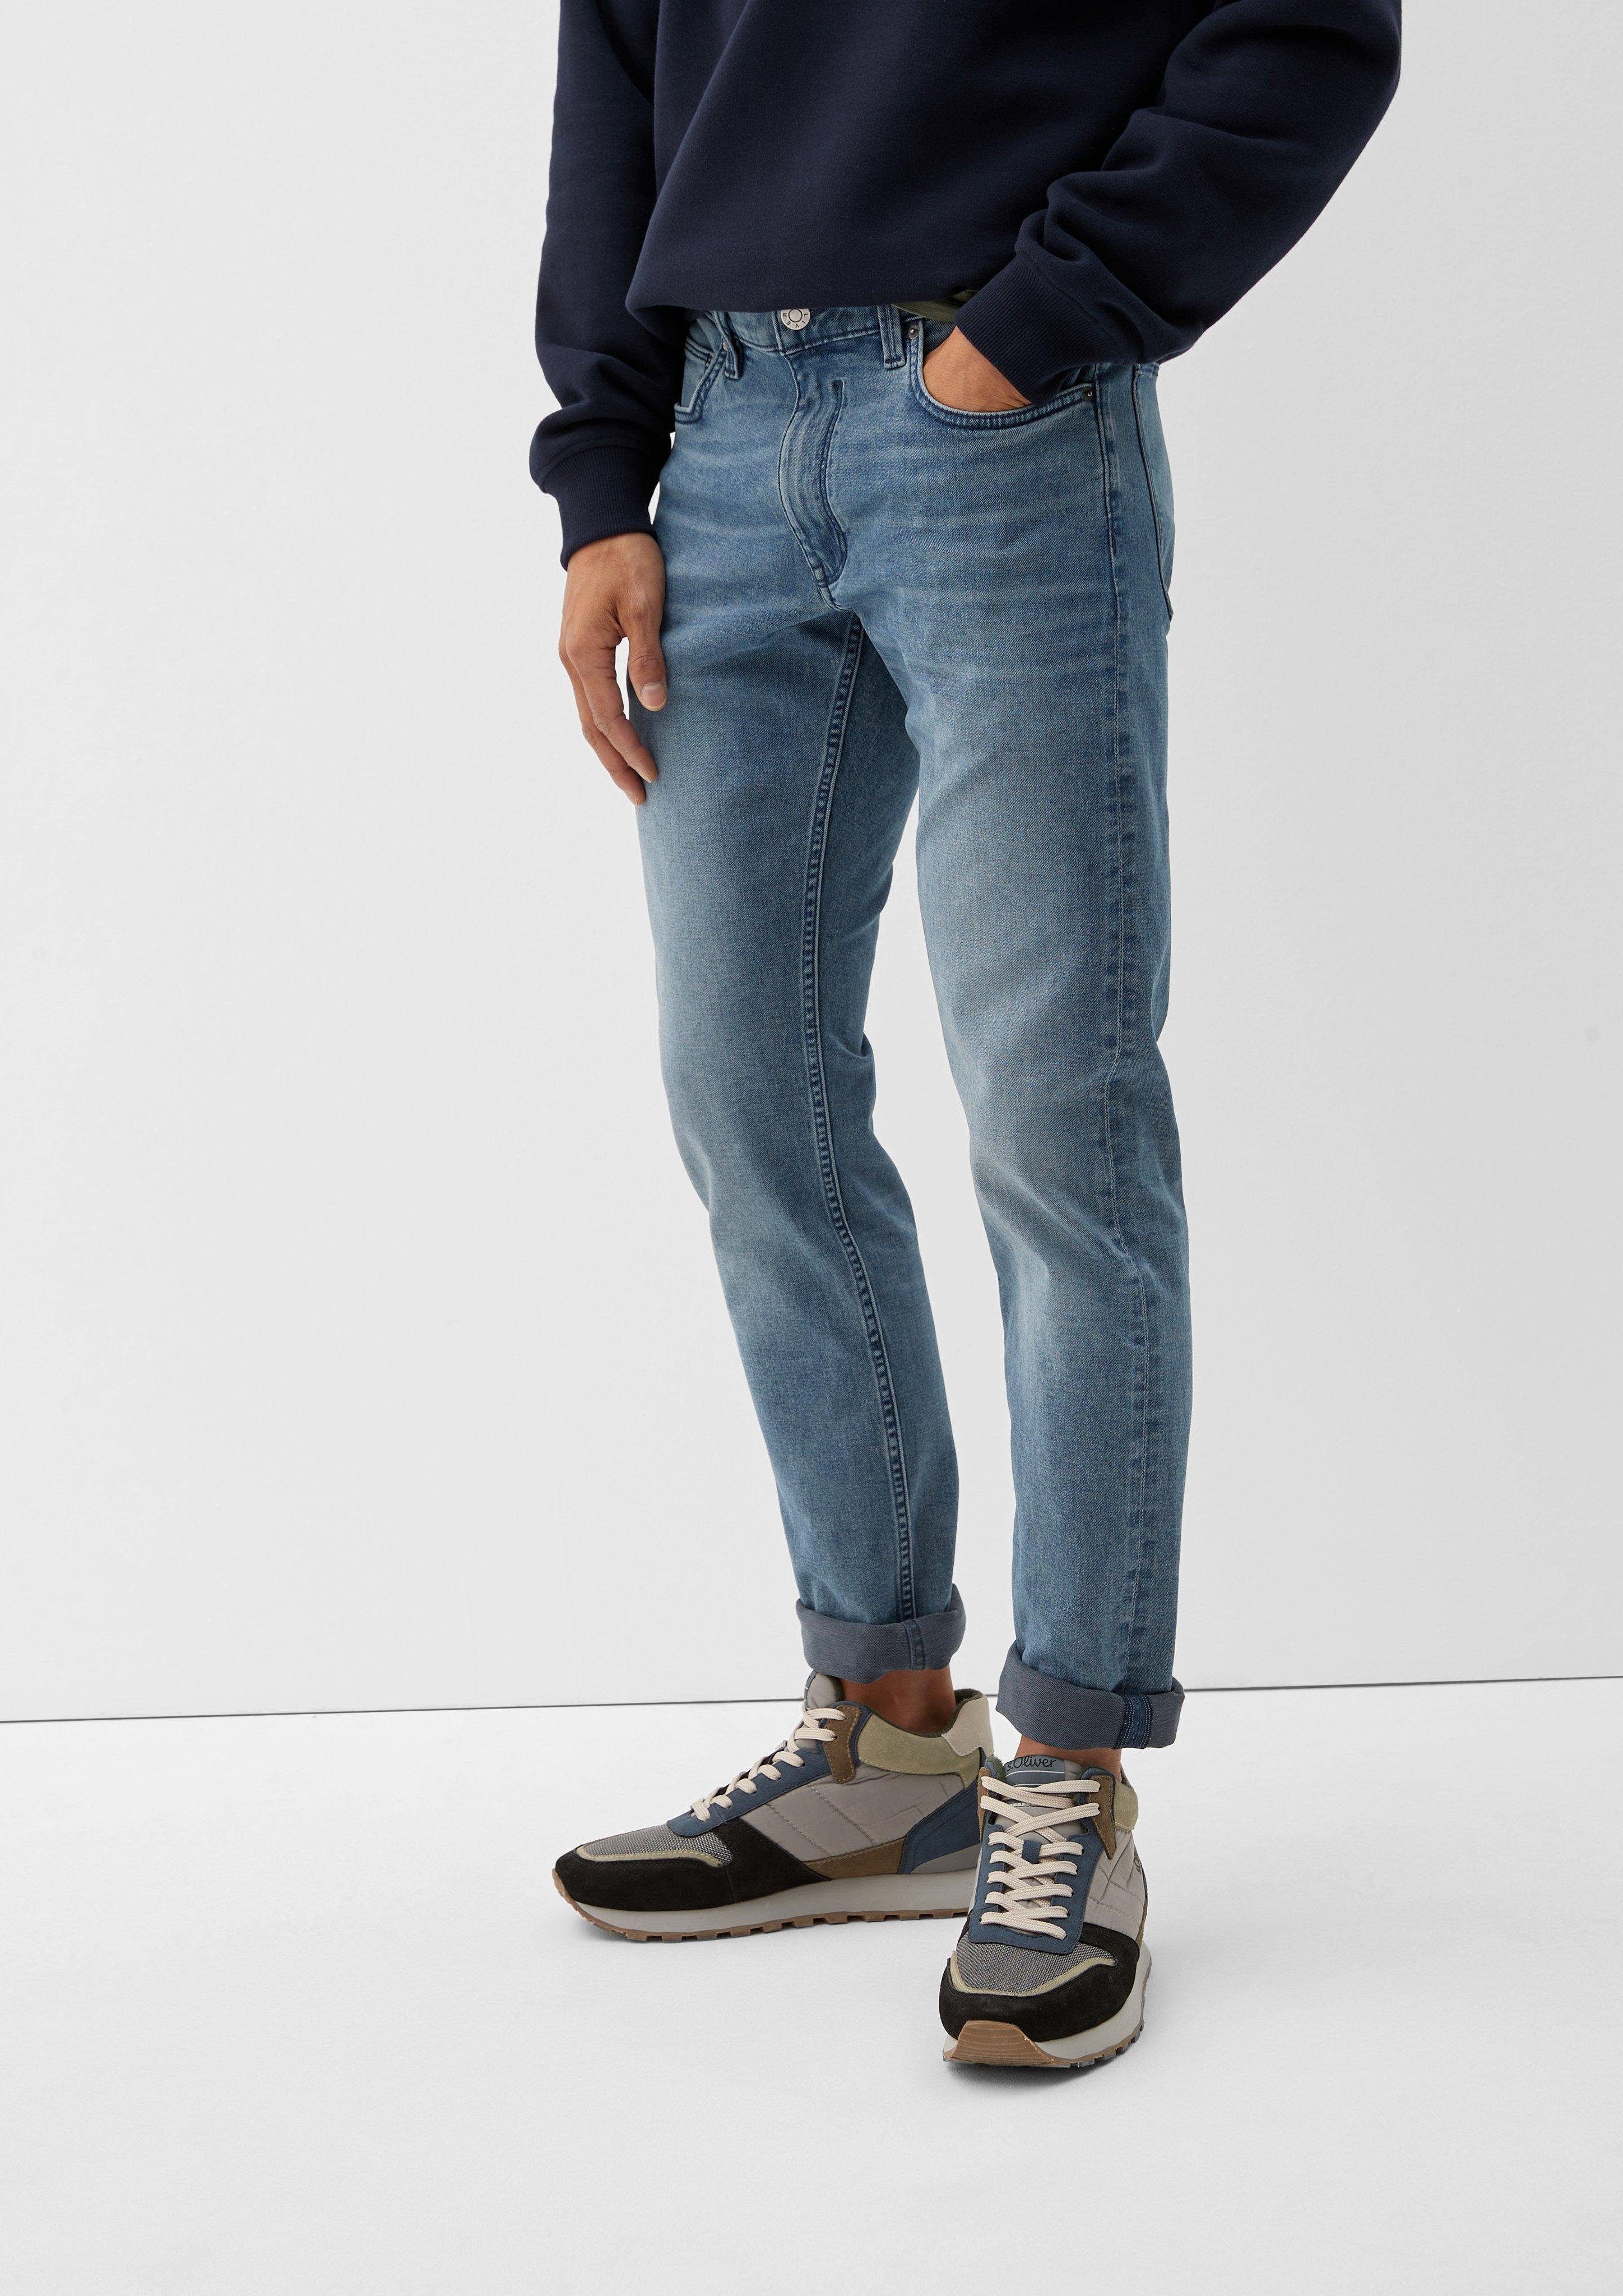 / Rise Jeans Leder-Patch s.Oliver Leg Waschung, / Fit Slim Carson / Tapered Mid Stoffhose